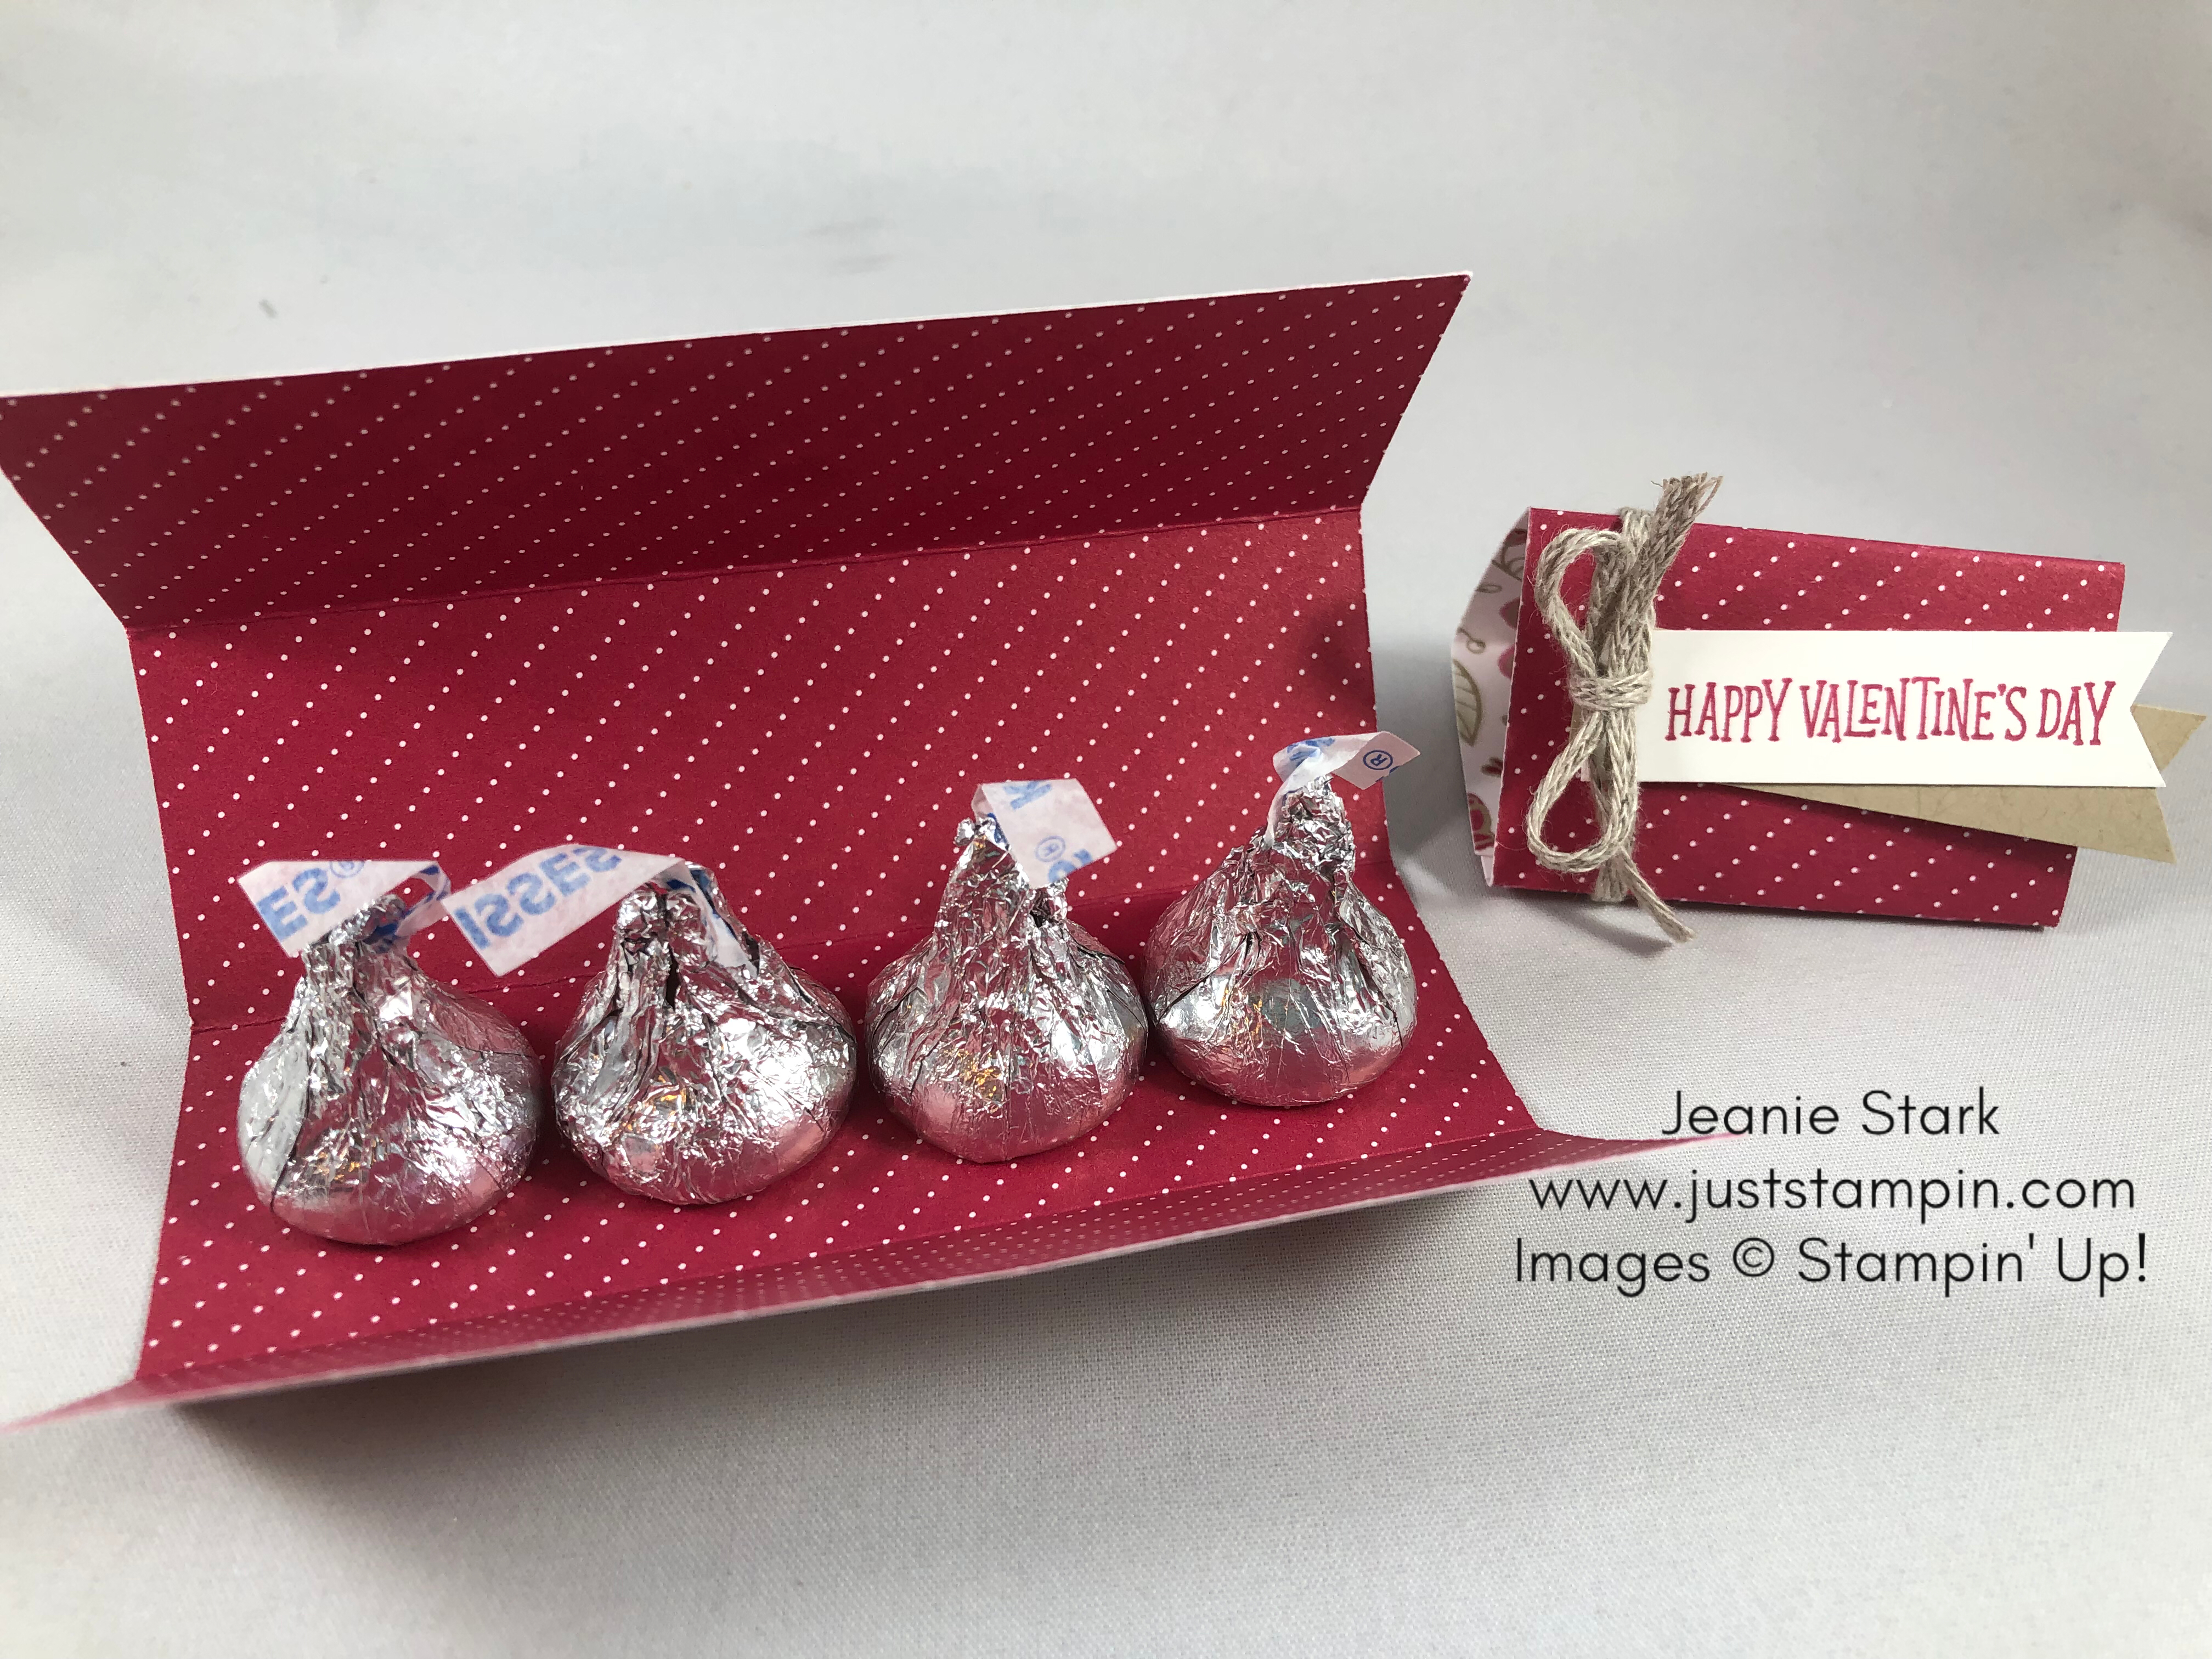 Stampin Up Hershey kiss treat holder idea for Valentine's Day using Paper Pumpkin stamp set and All My Love Designer Series Paper - Jeanie Stark StampinUp